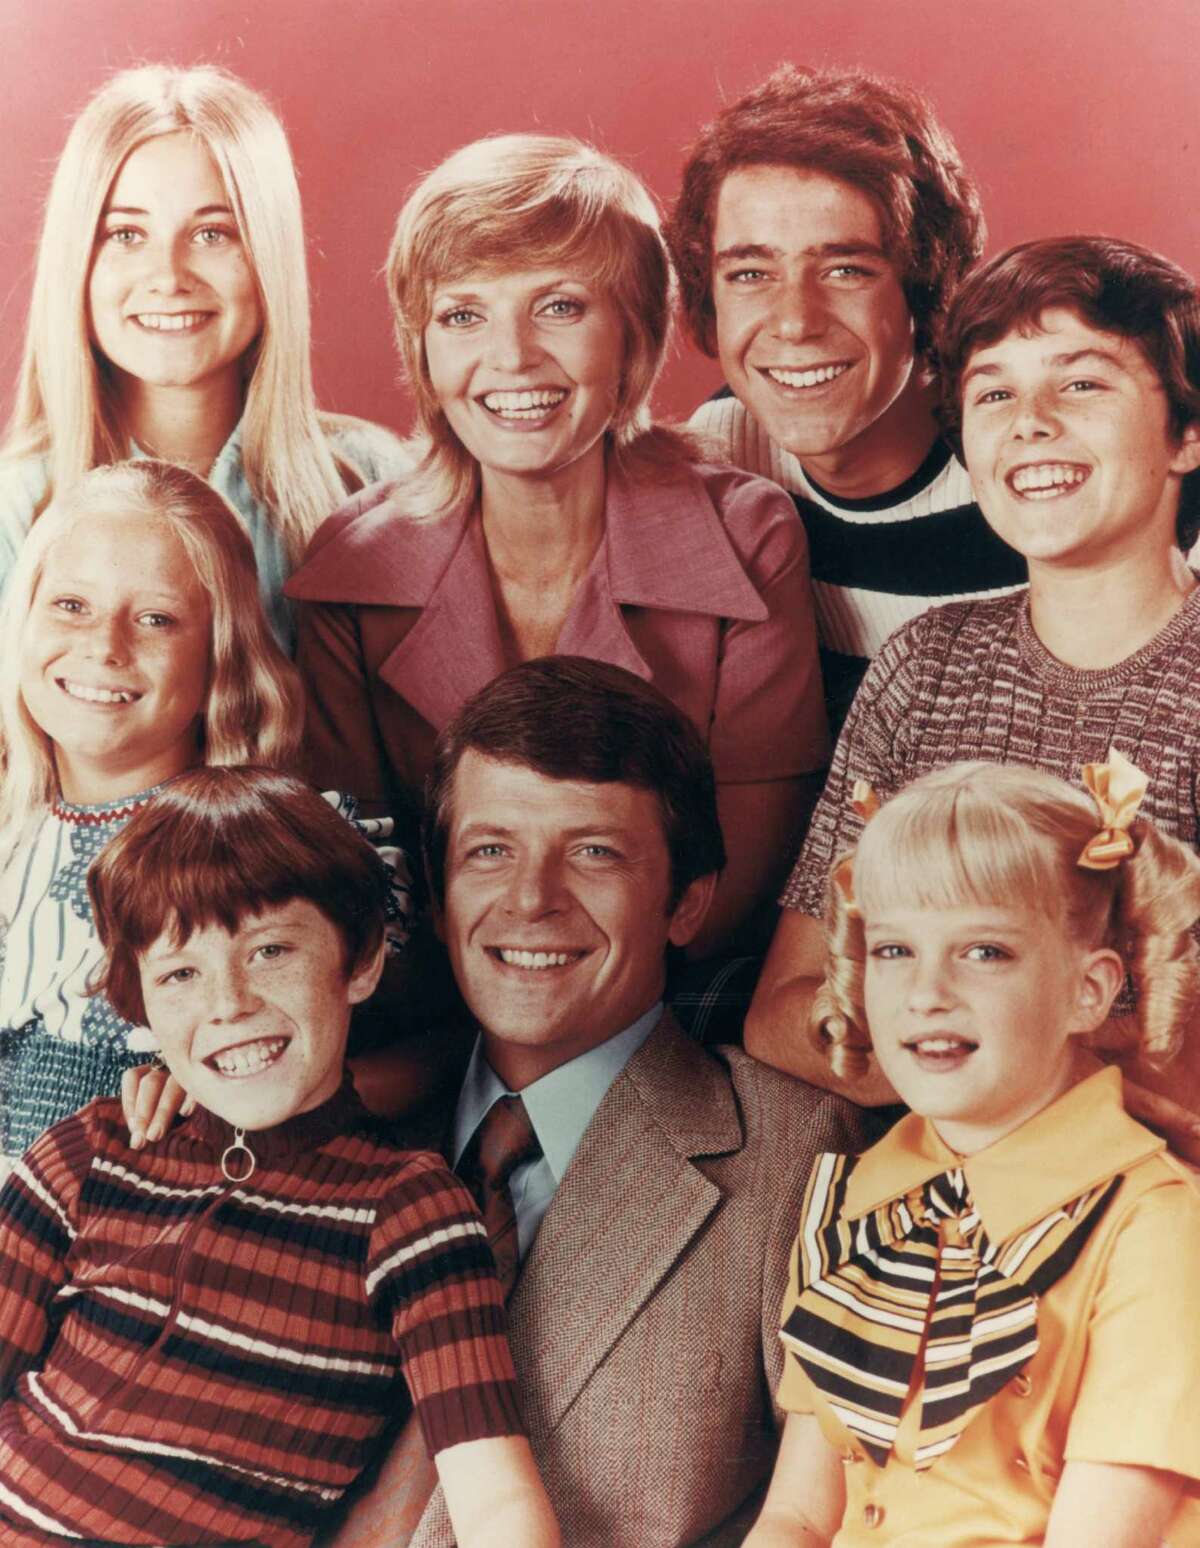 “The Brady Bunch” showed that divorced or widowed people could take pieces of their traditional families and form new ones.